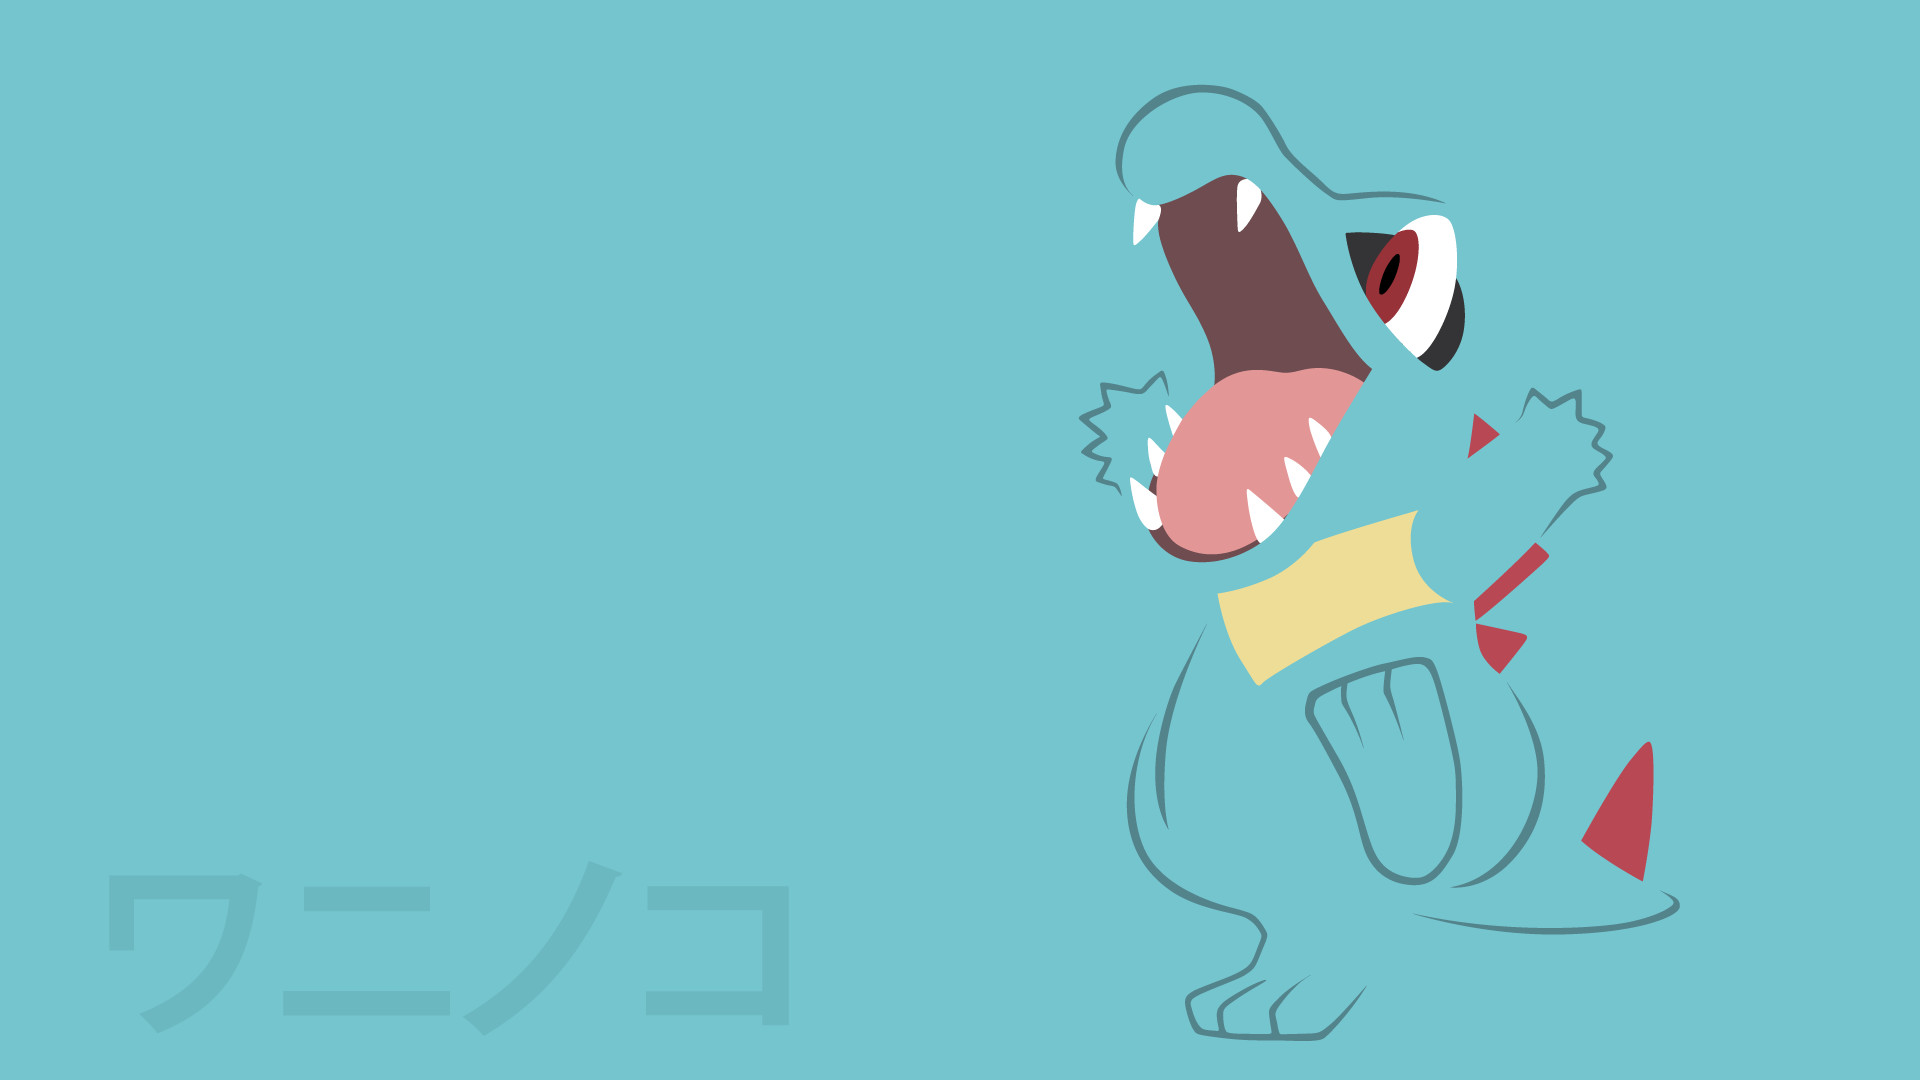 1920x1080 Totodile by DannyMyBrother Totodile by DannyMyBrother